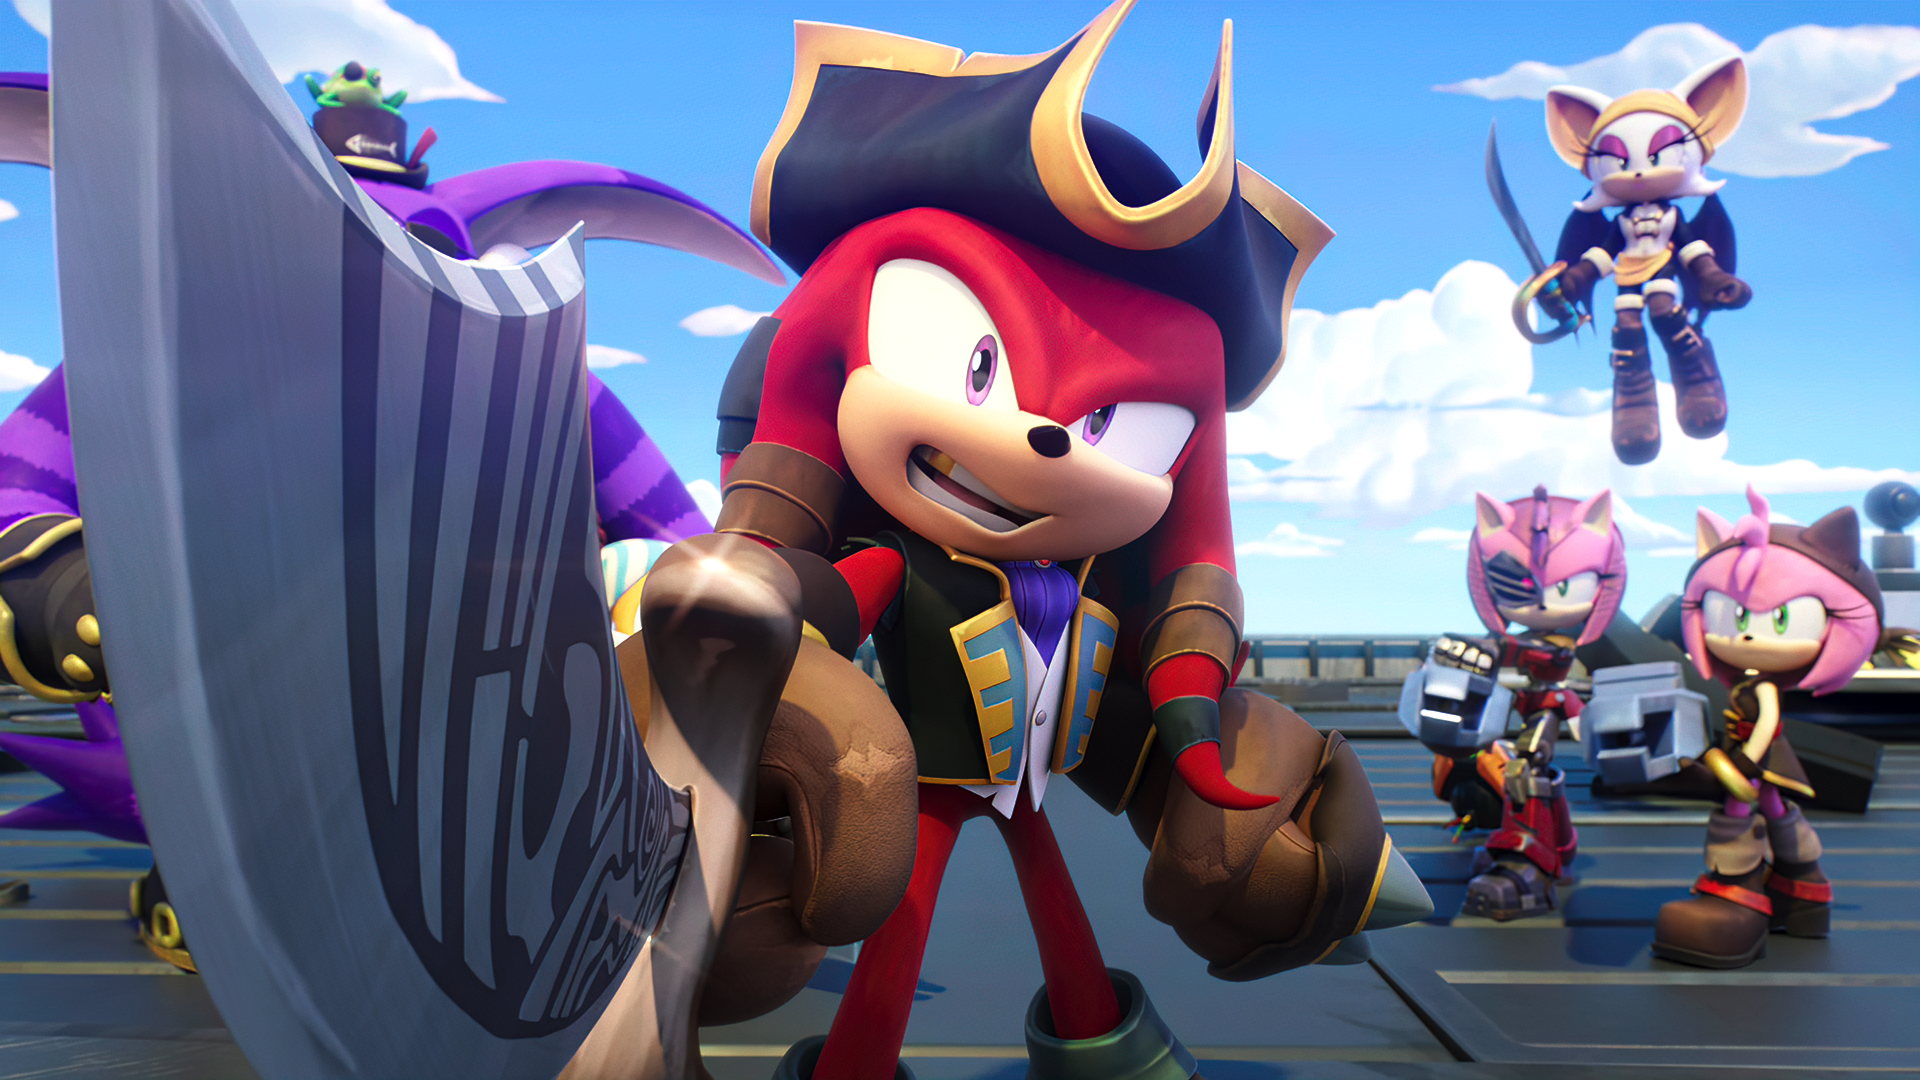 PREDICTIONS: In Sonic Prime, Pirate Knuckles' crewmates will be